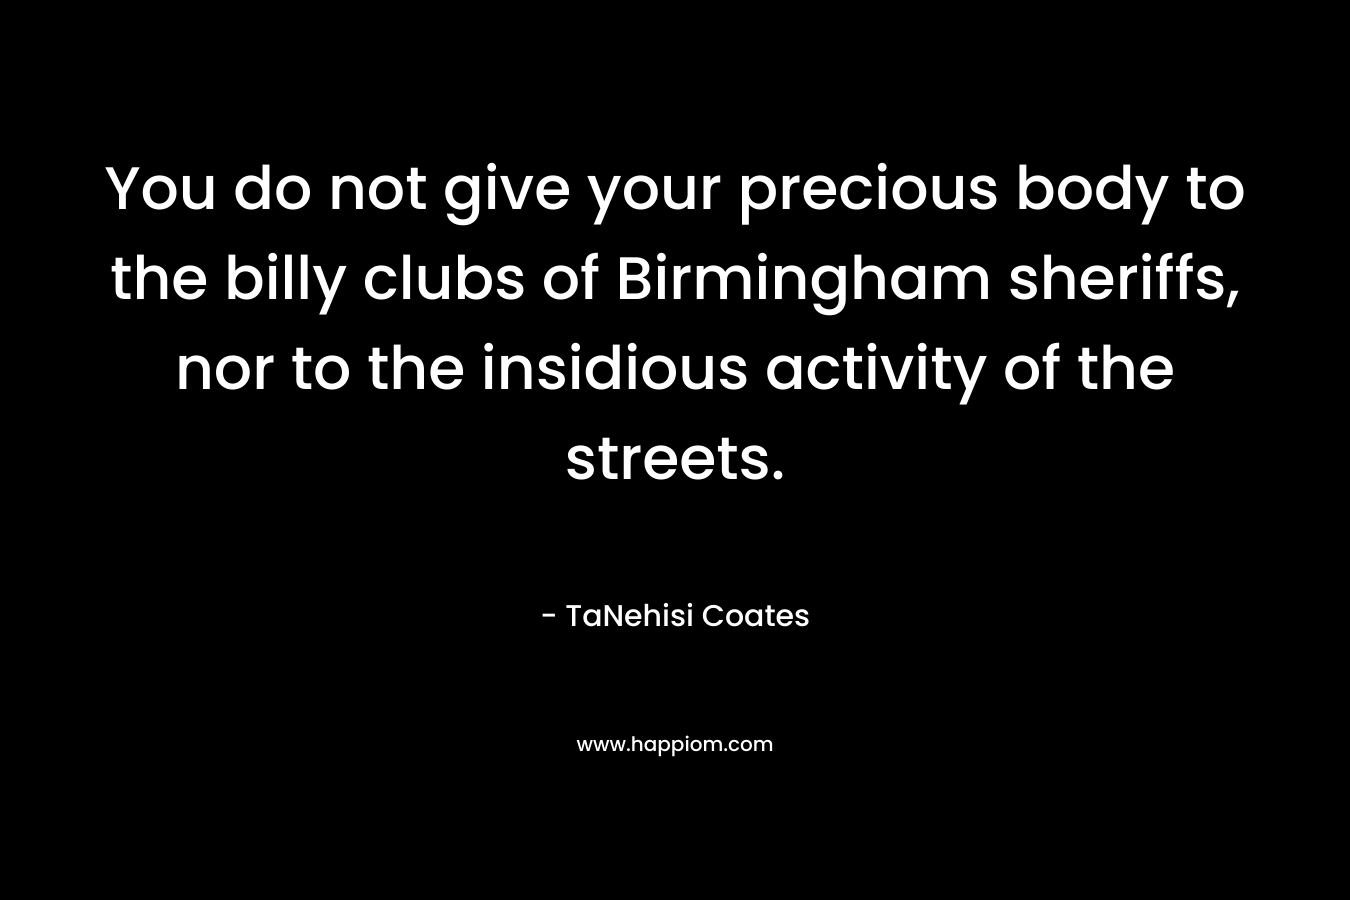 You do not give your precious body to the billy clubs of Birmingham sheriffs, nor to the insidious activity of the streets. – TaNehisi Coates